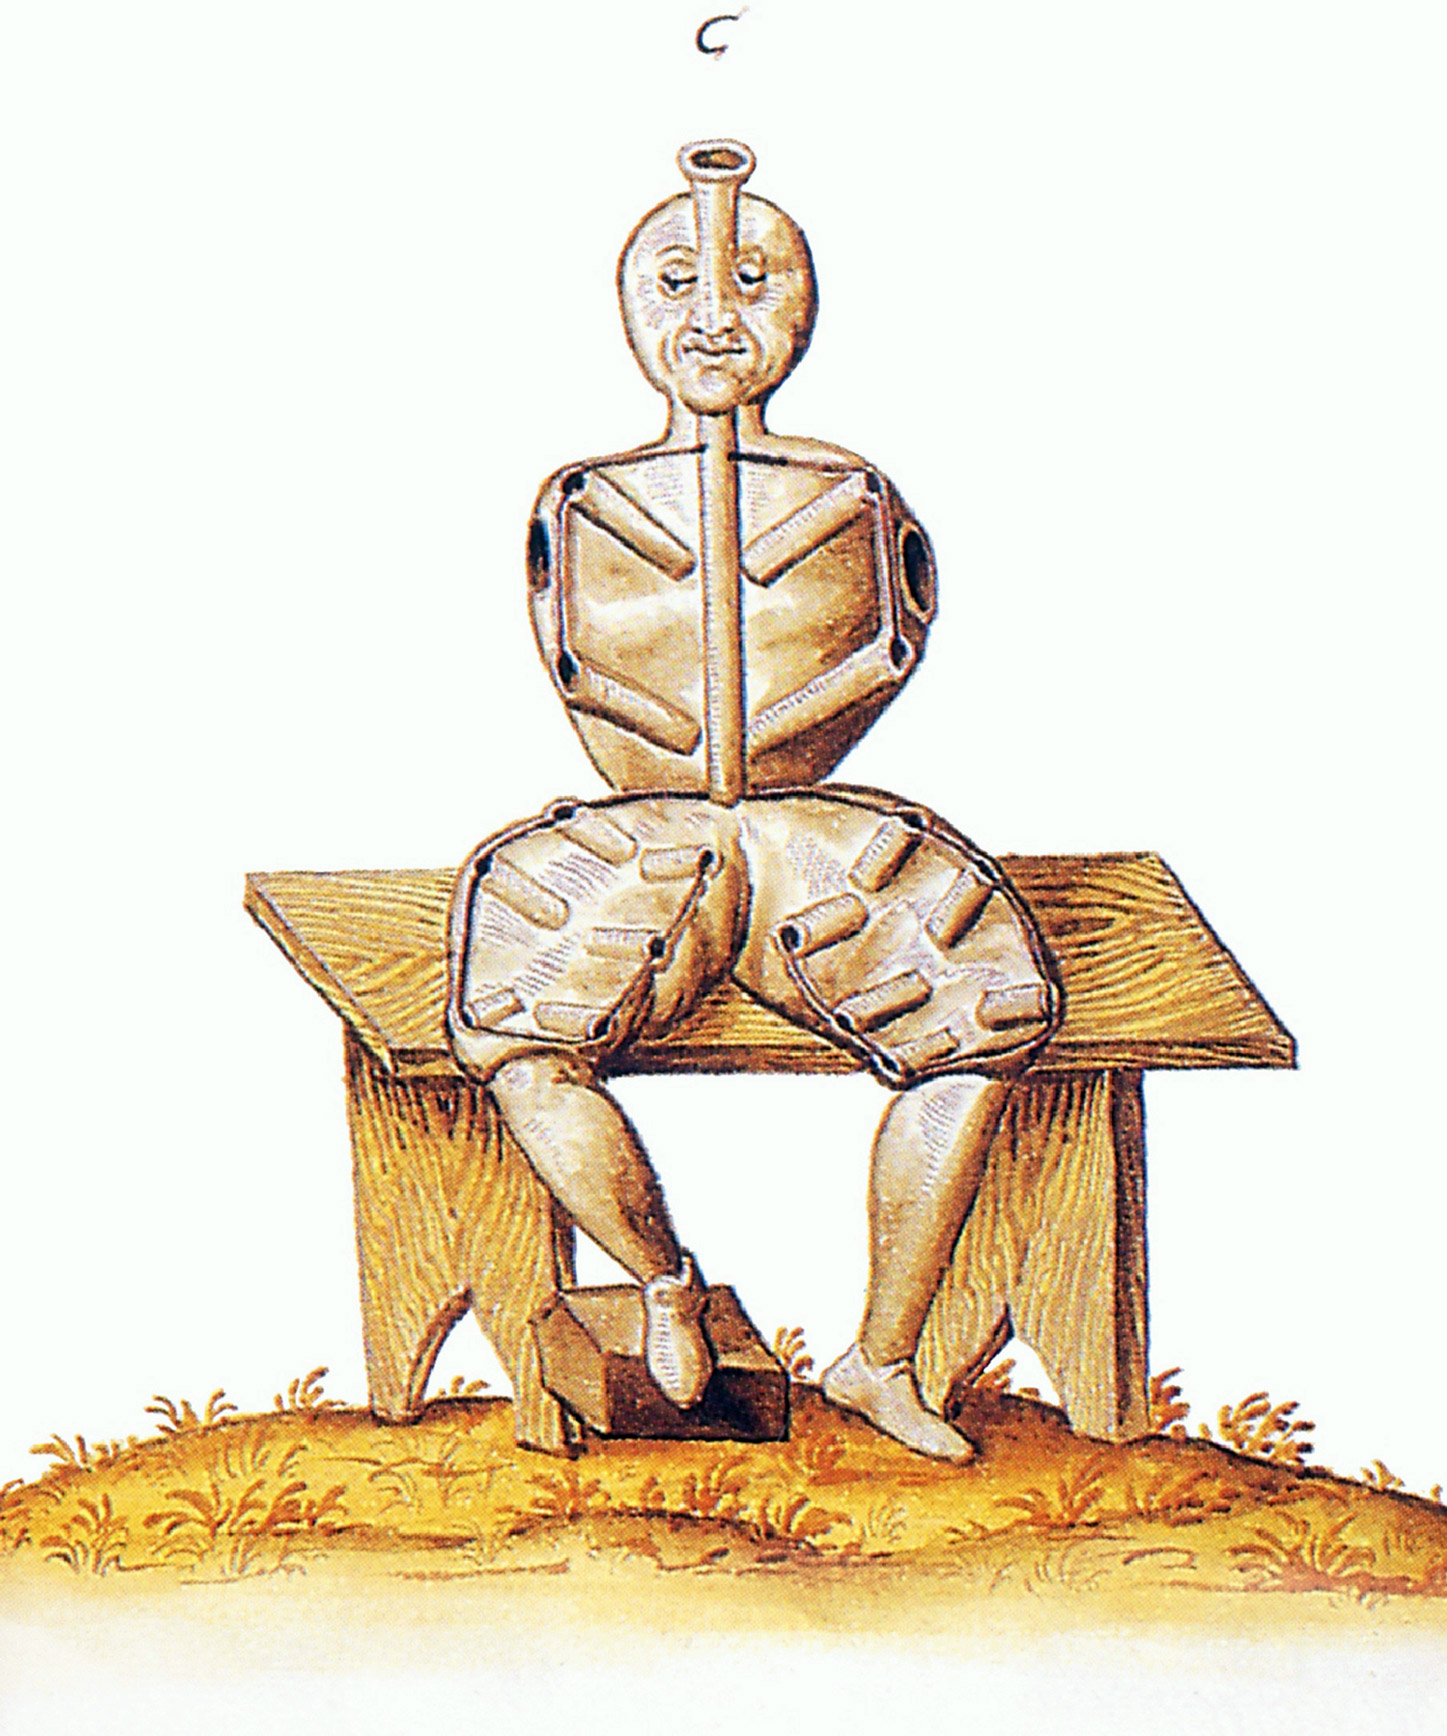 A 1610 drawing from a manuscript by Johann I. von Nassau-Siegen.The drawing shows the construction of a seated figure. 